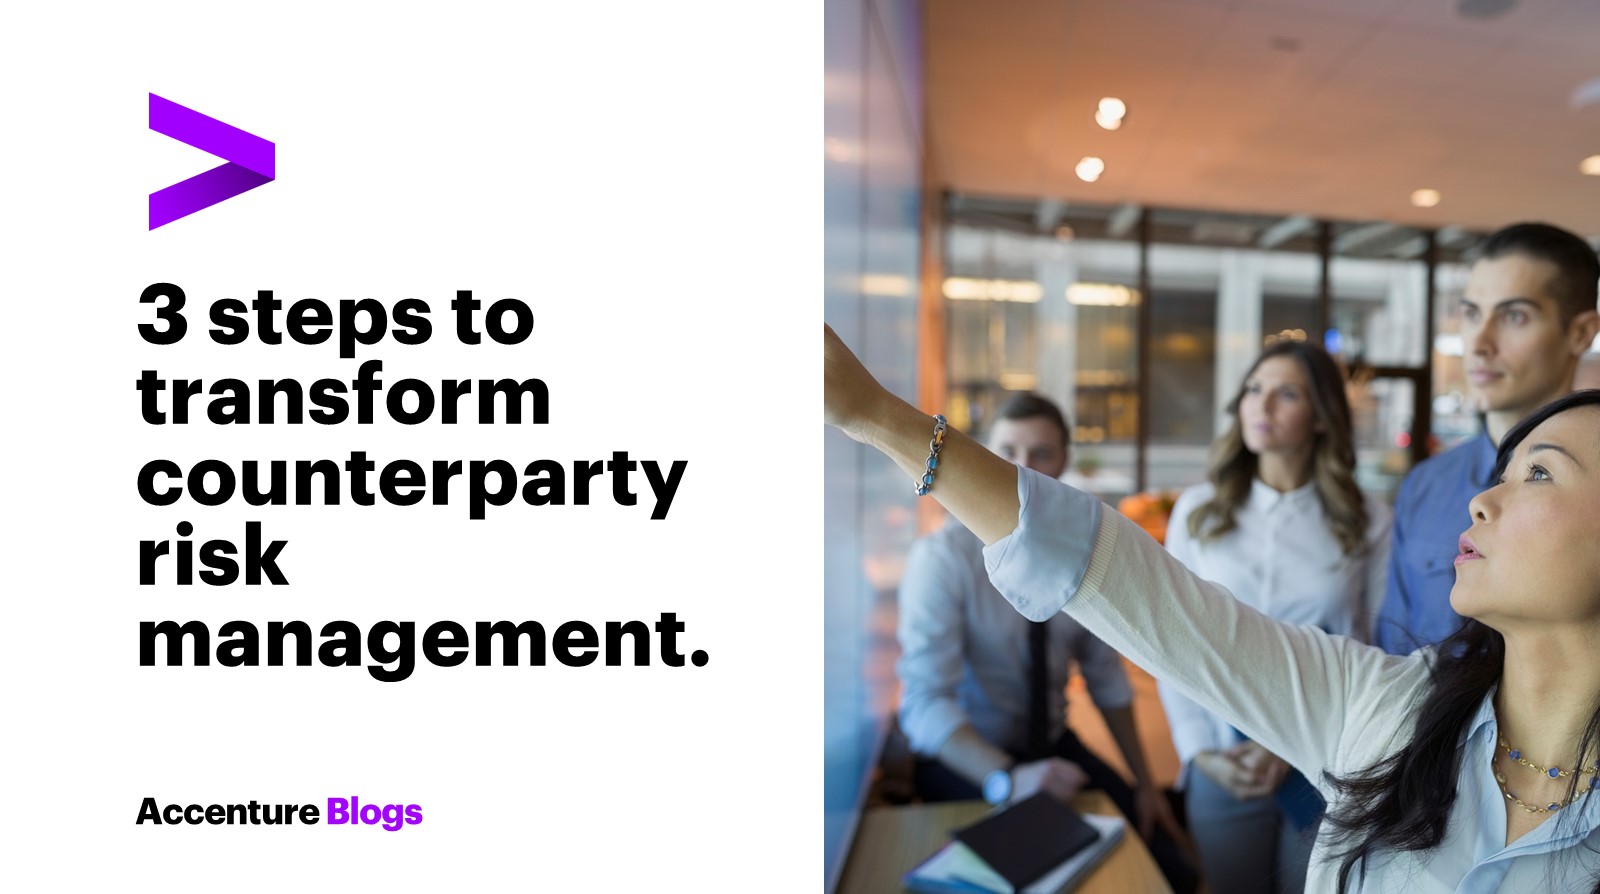 3 steps to transform counterparty risk management.